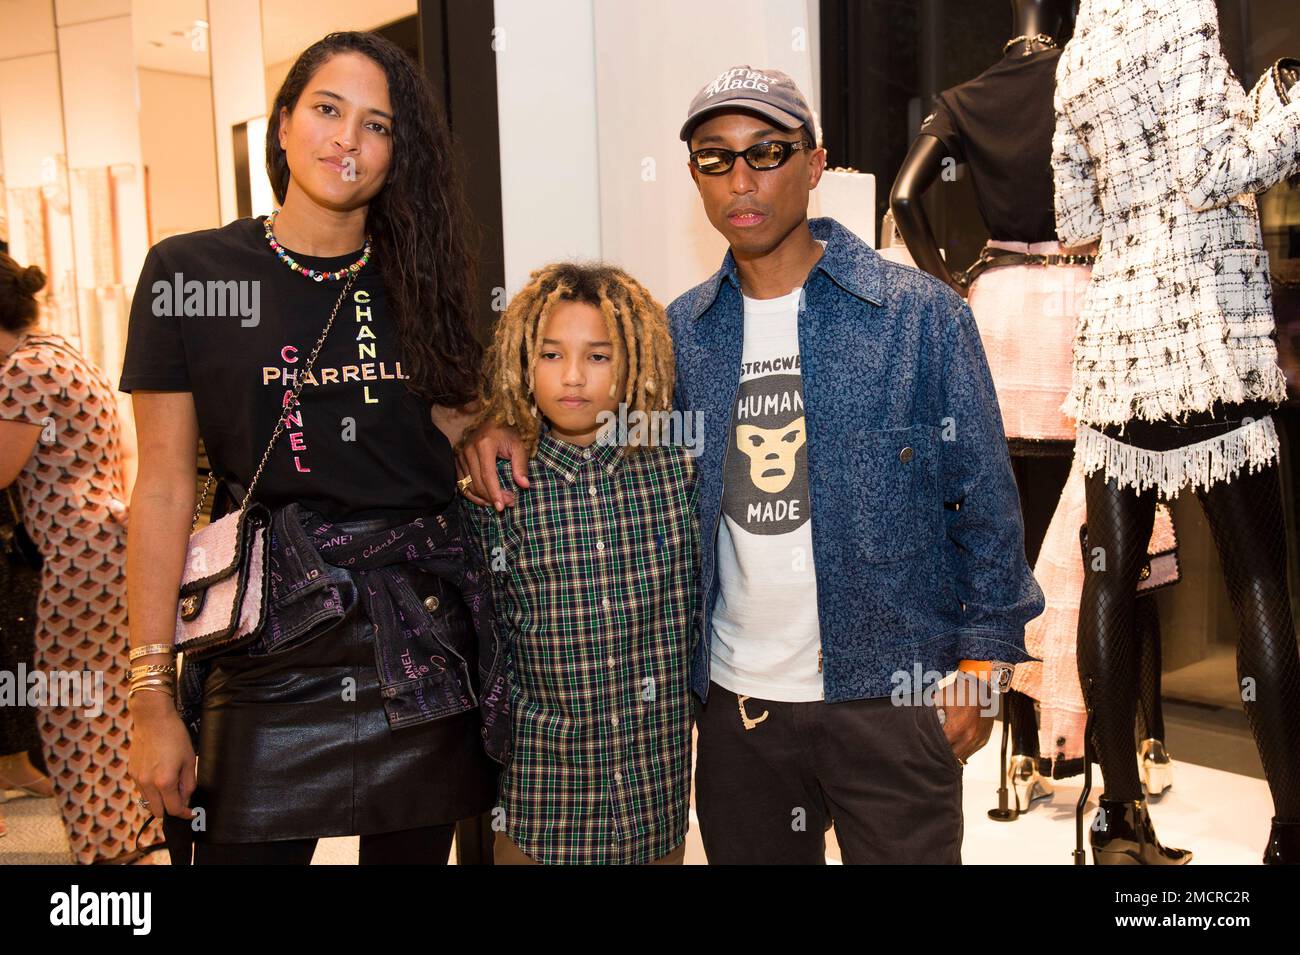 Helen Williams, from left, Rocket Ayer Williams, and Pharrell